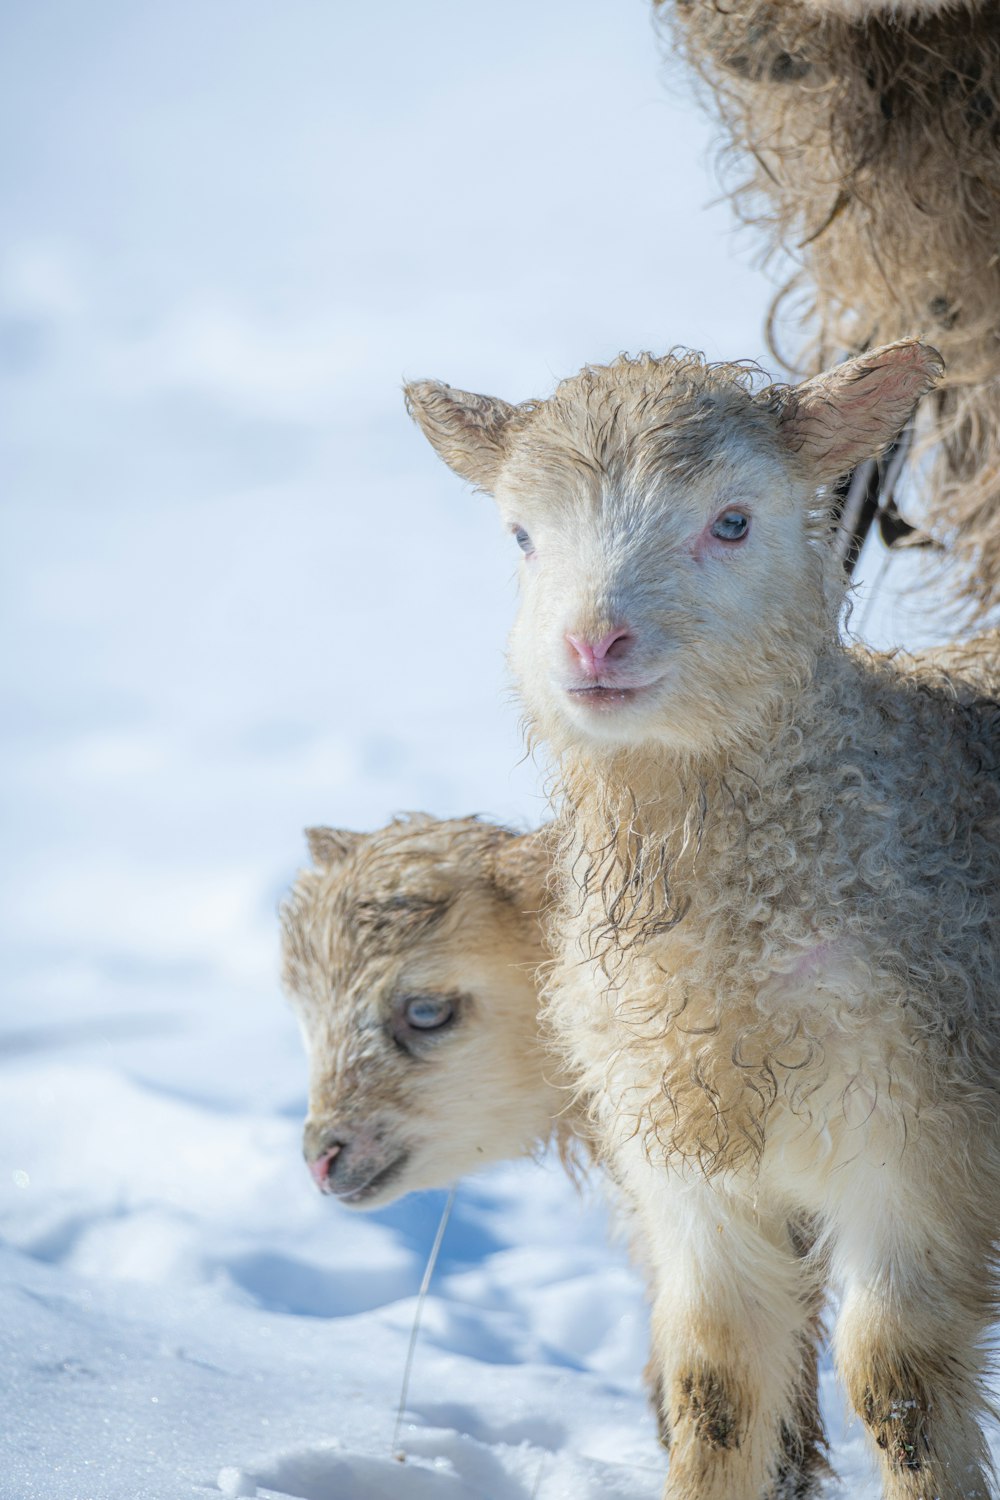 a baby sheep standing next to an adult sheep in the snow